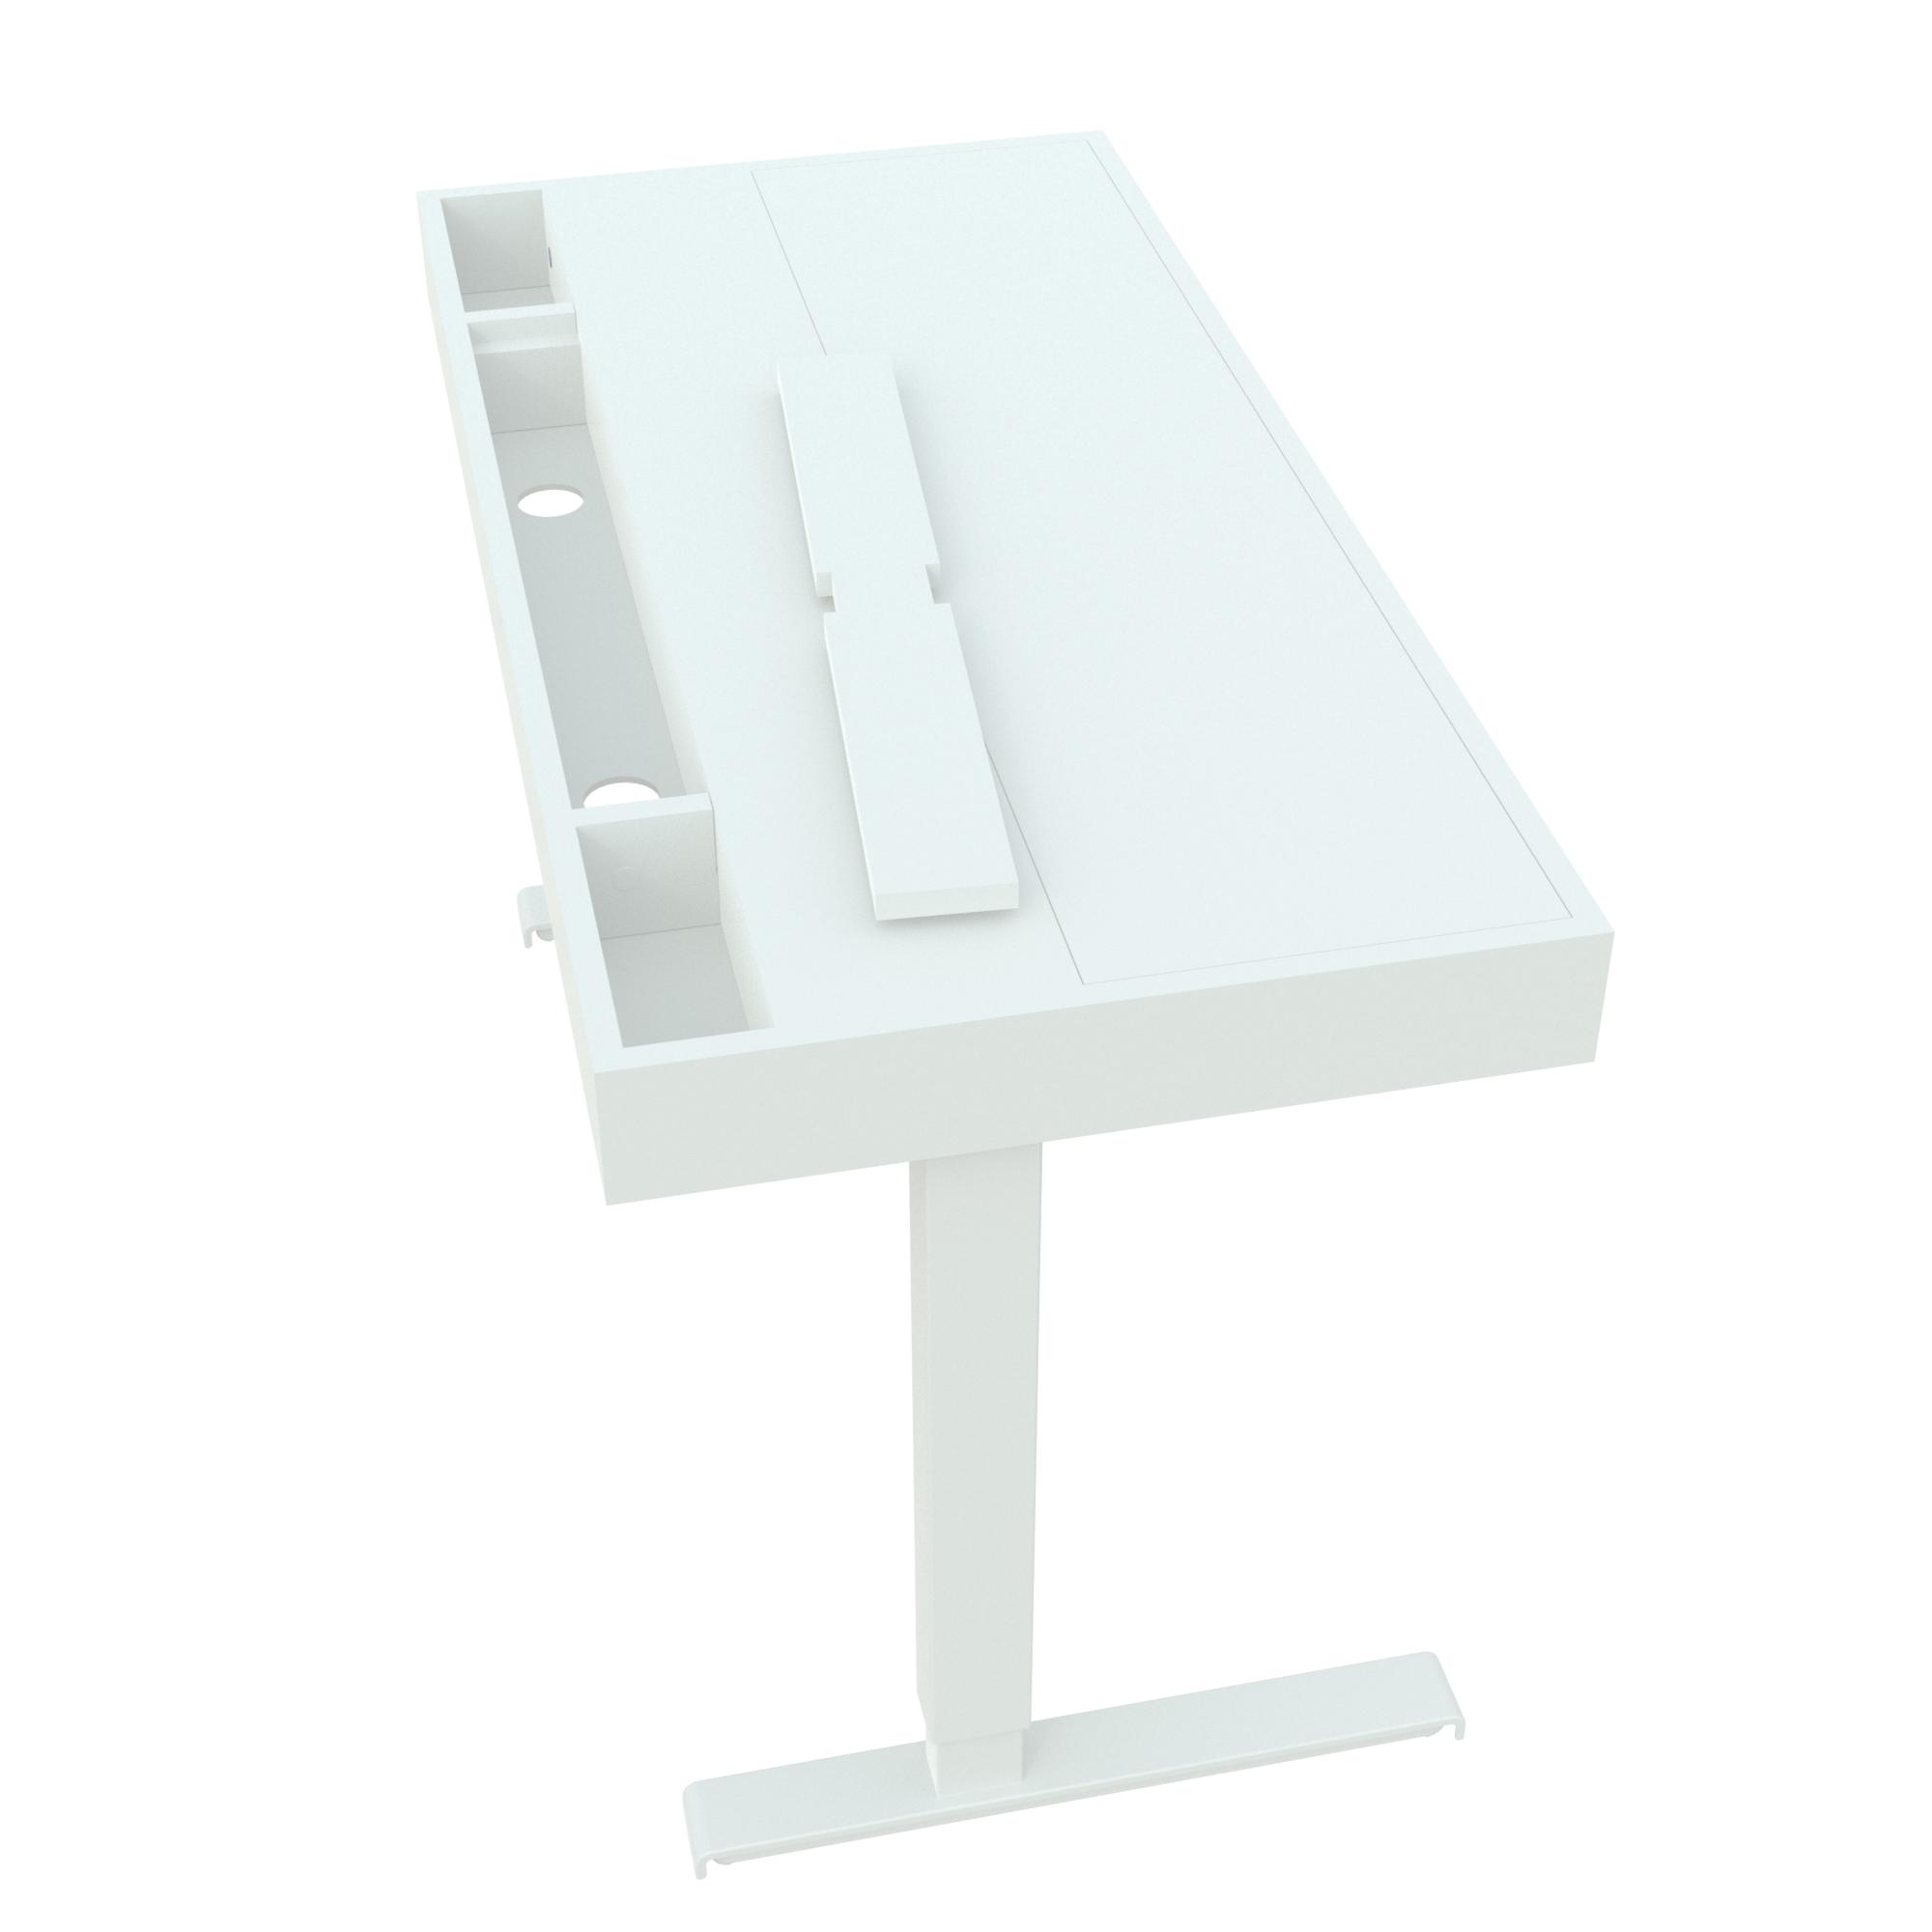 Electric Adjustable Desk | x cm |  with white frame